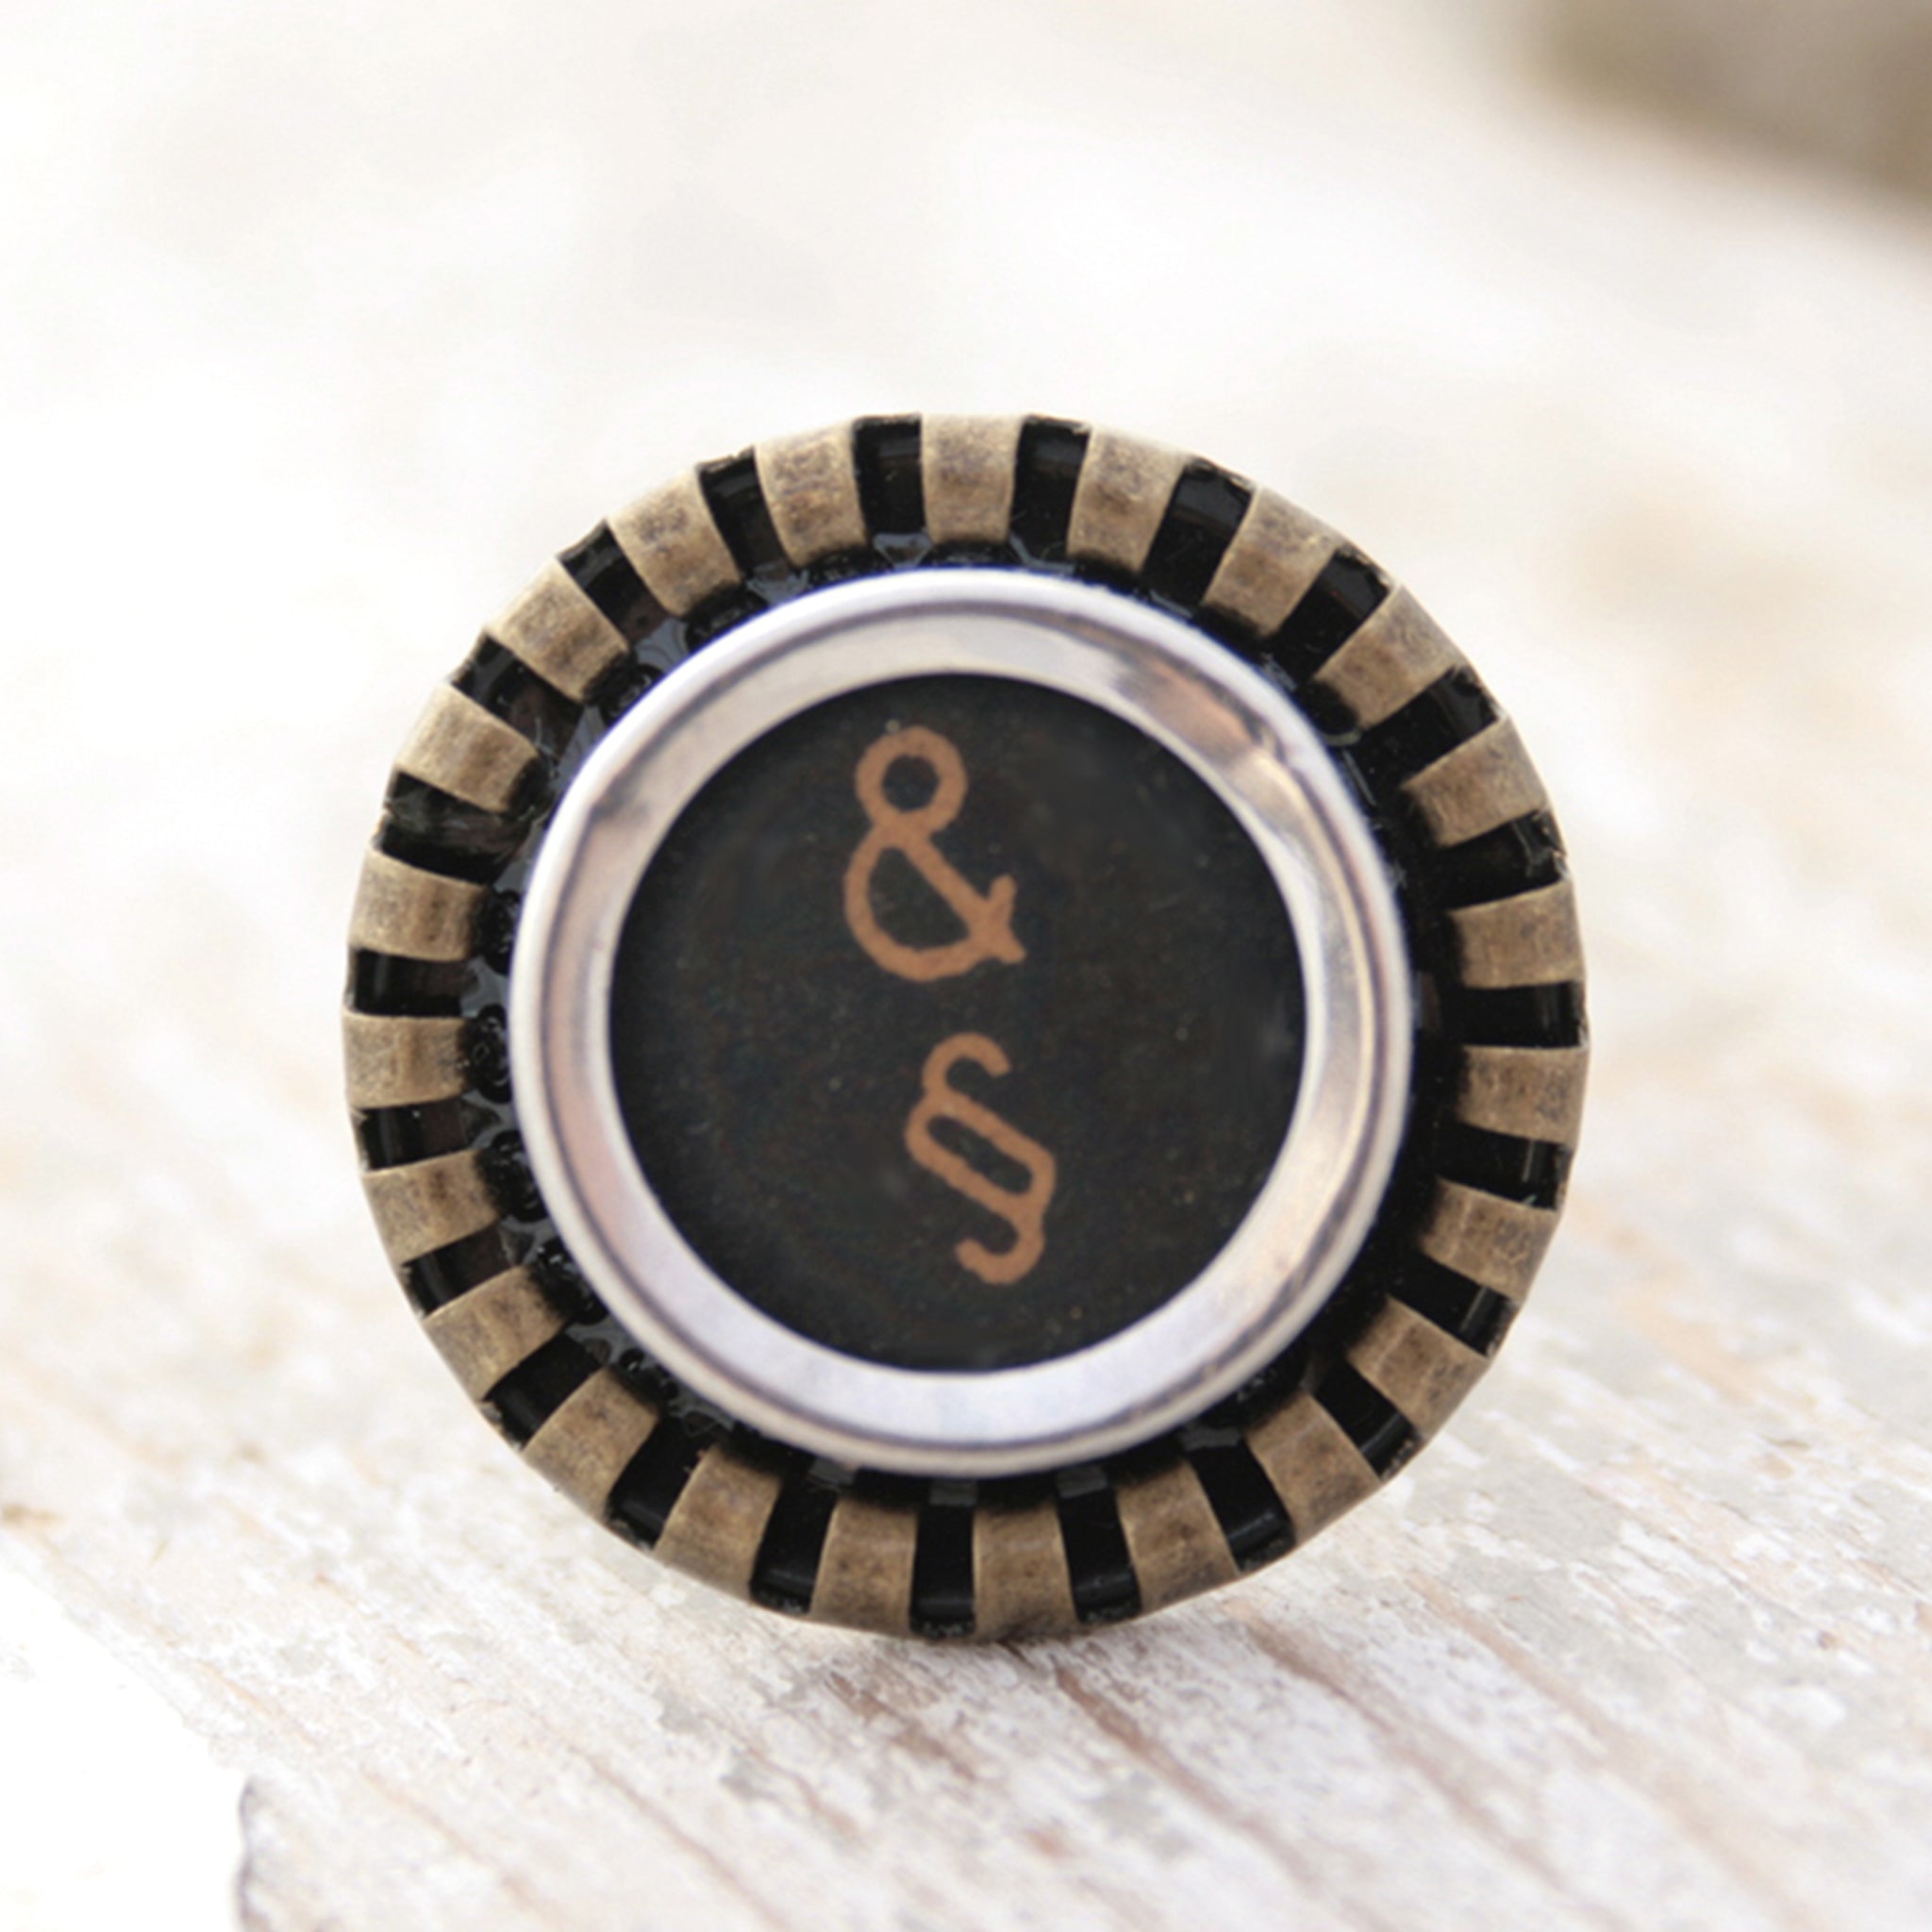 Black Ring featuring Amresand and paragraph signs made of typewriter key